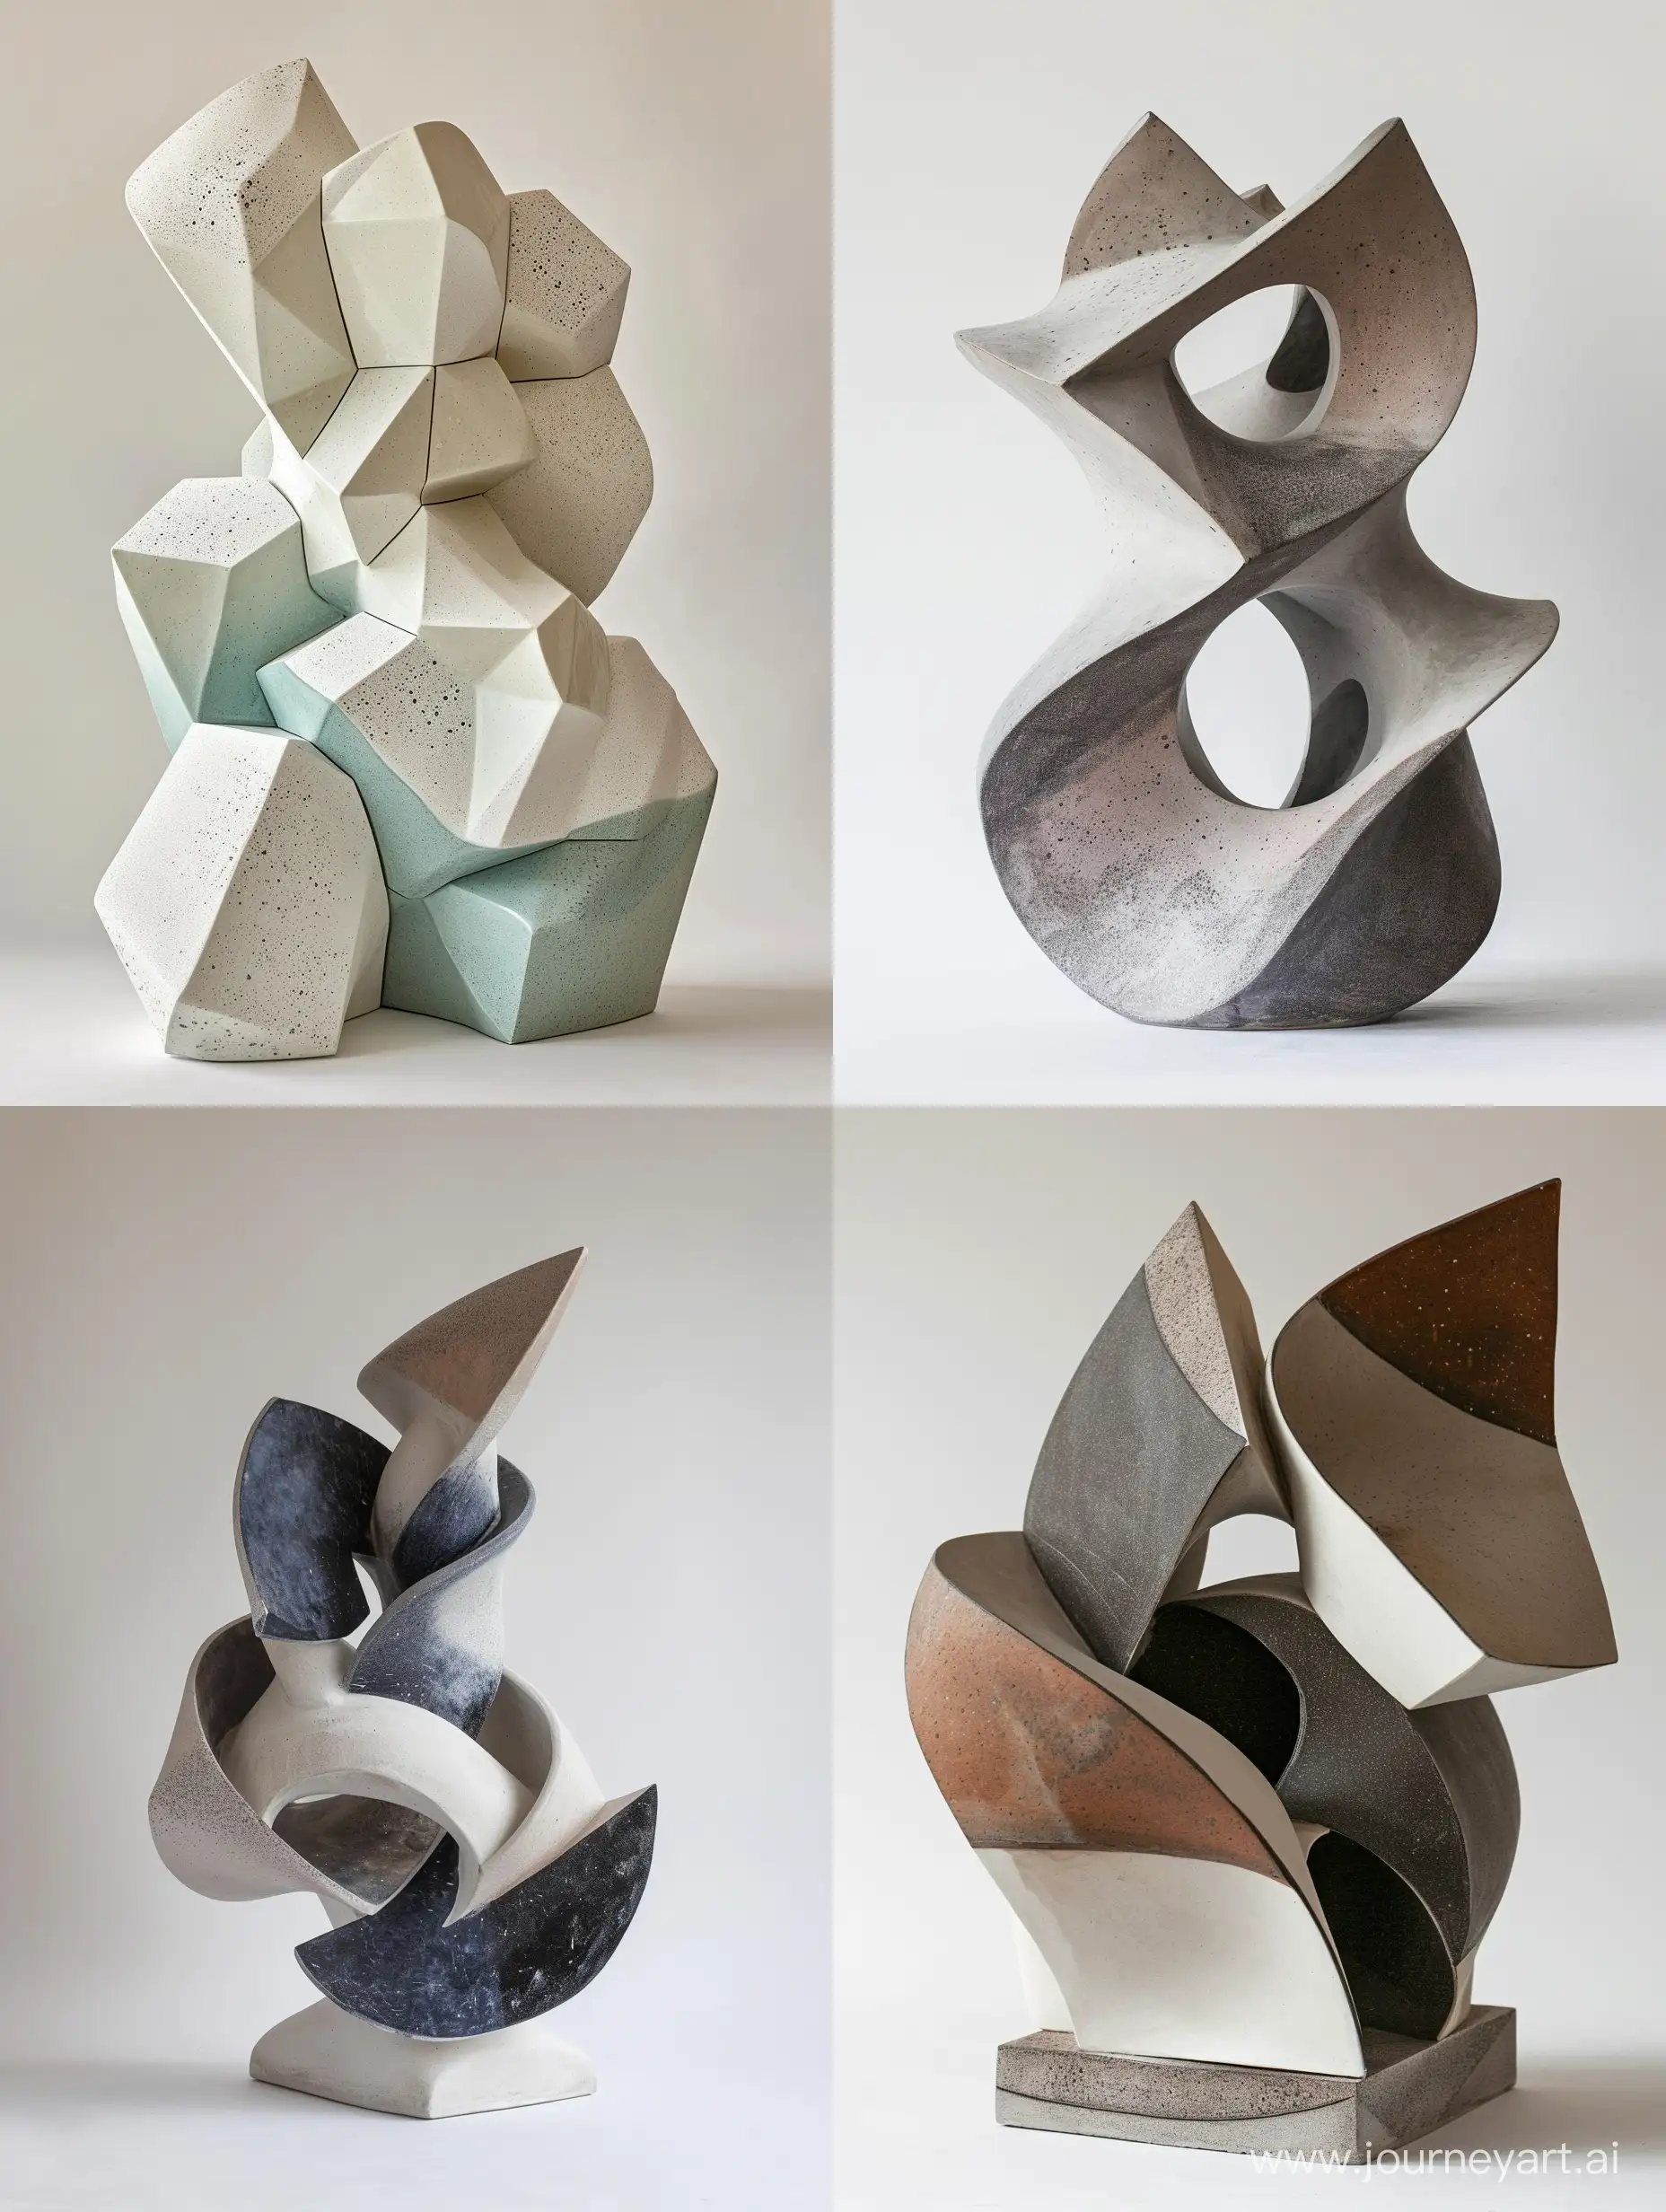 Sculptural-Elegance-Abstract-Geometric-Ceramic-Masterpiece-of-the-60s